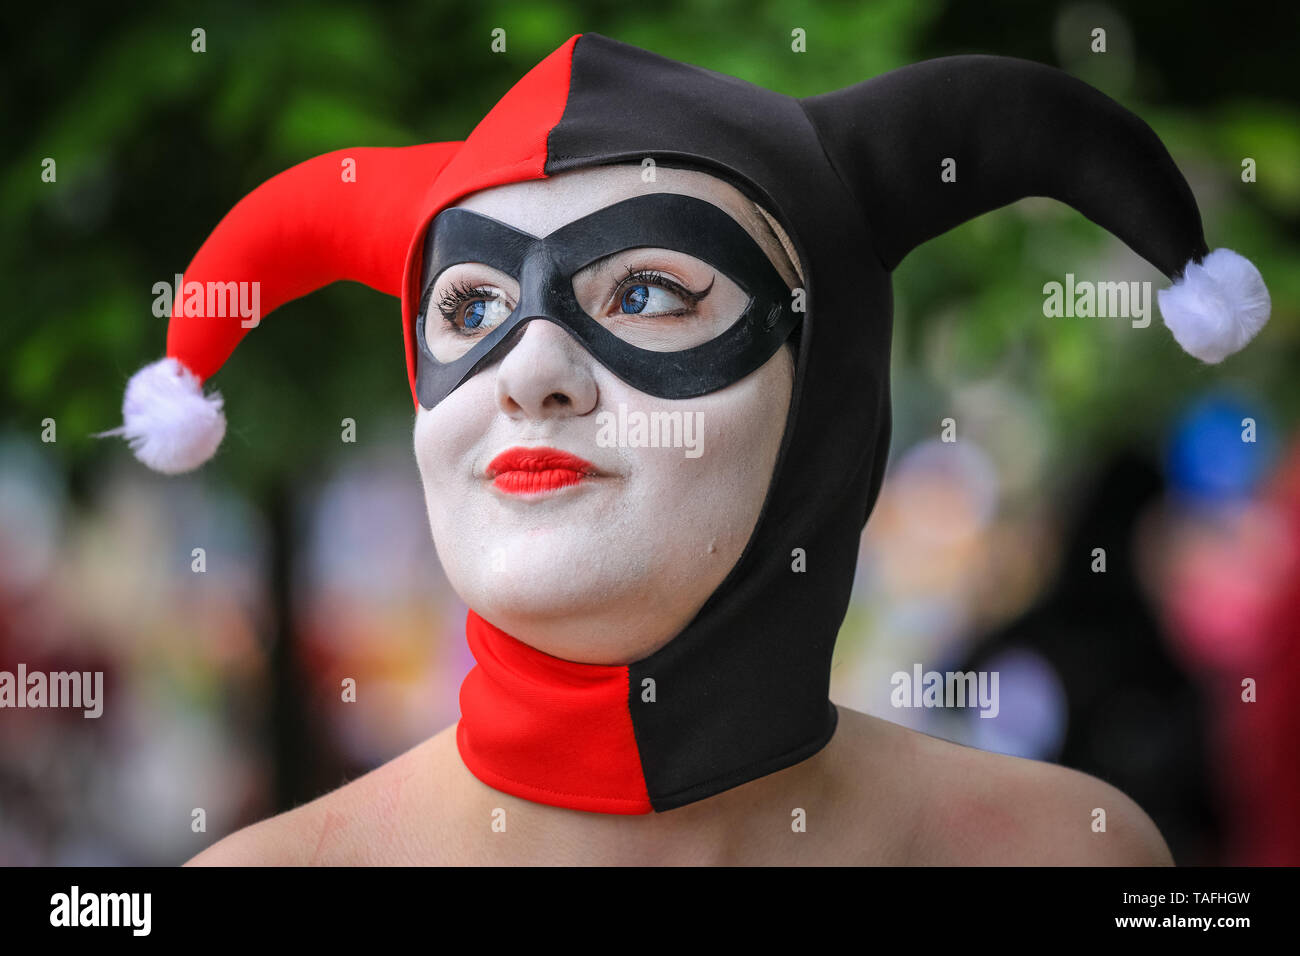 ExCel London, UK - 24th May 2019. A young woman dressed as Harley Quinn from Batman. Thousands of cosplayers, gamers and lovers of film and TV fantasy and sci fi in costumes come together on the opening day of MCM Comicon at ExCel London. Credit: Imageplotter/Alamy Live News Stock Photo